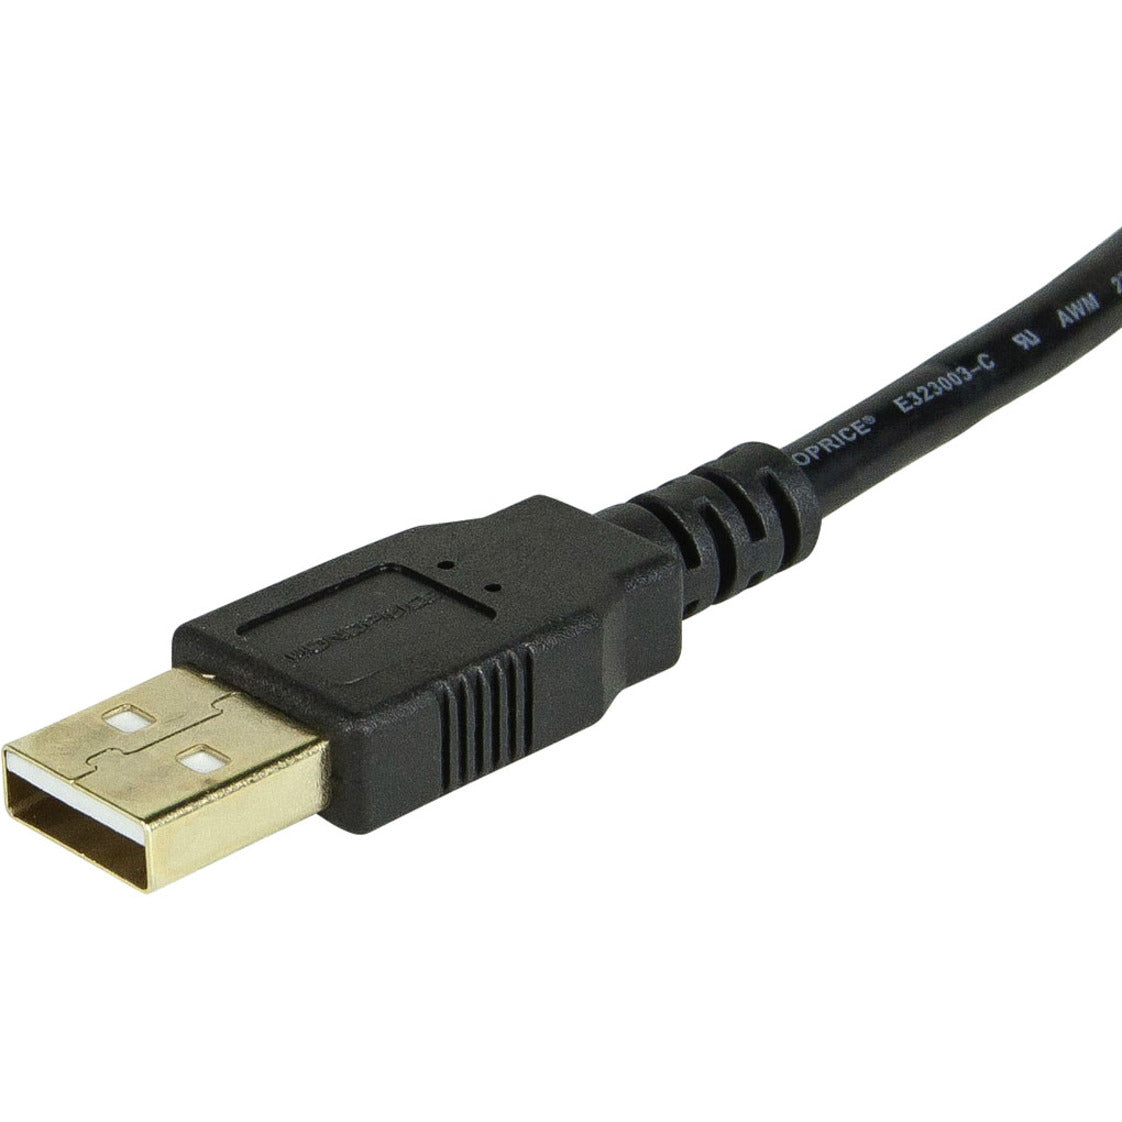 Monoprice 5433 6ft USB 2.0 A Male to A Female Extension Cable Corrosion-Free Gold Plated